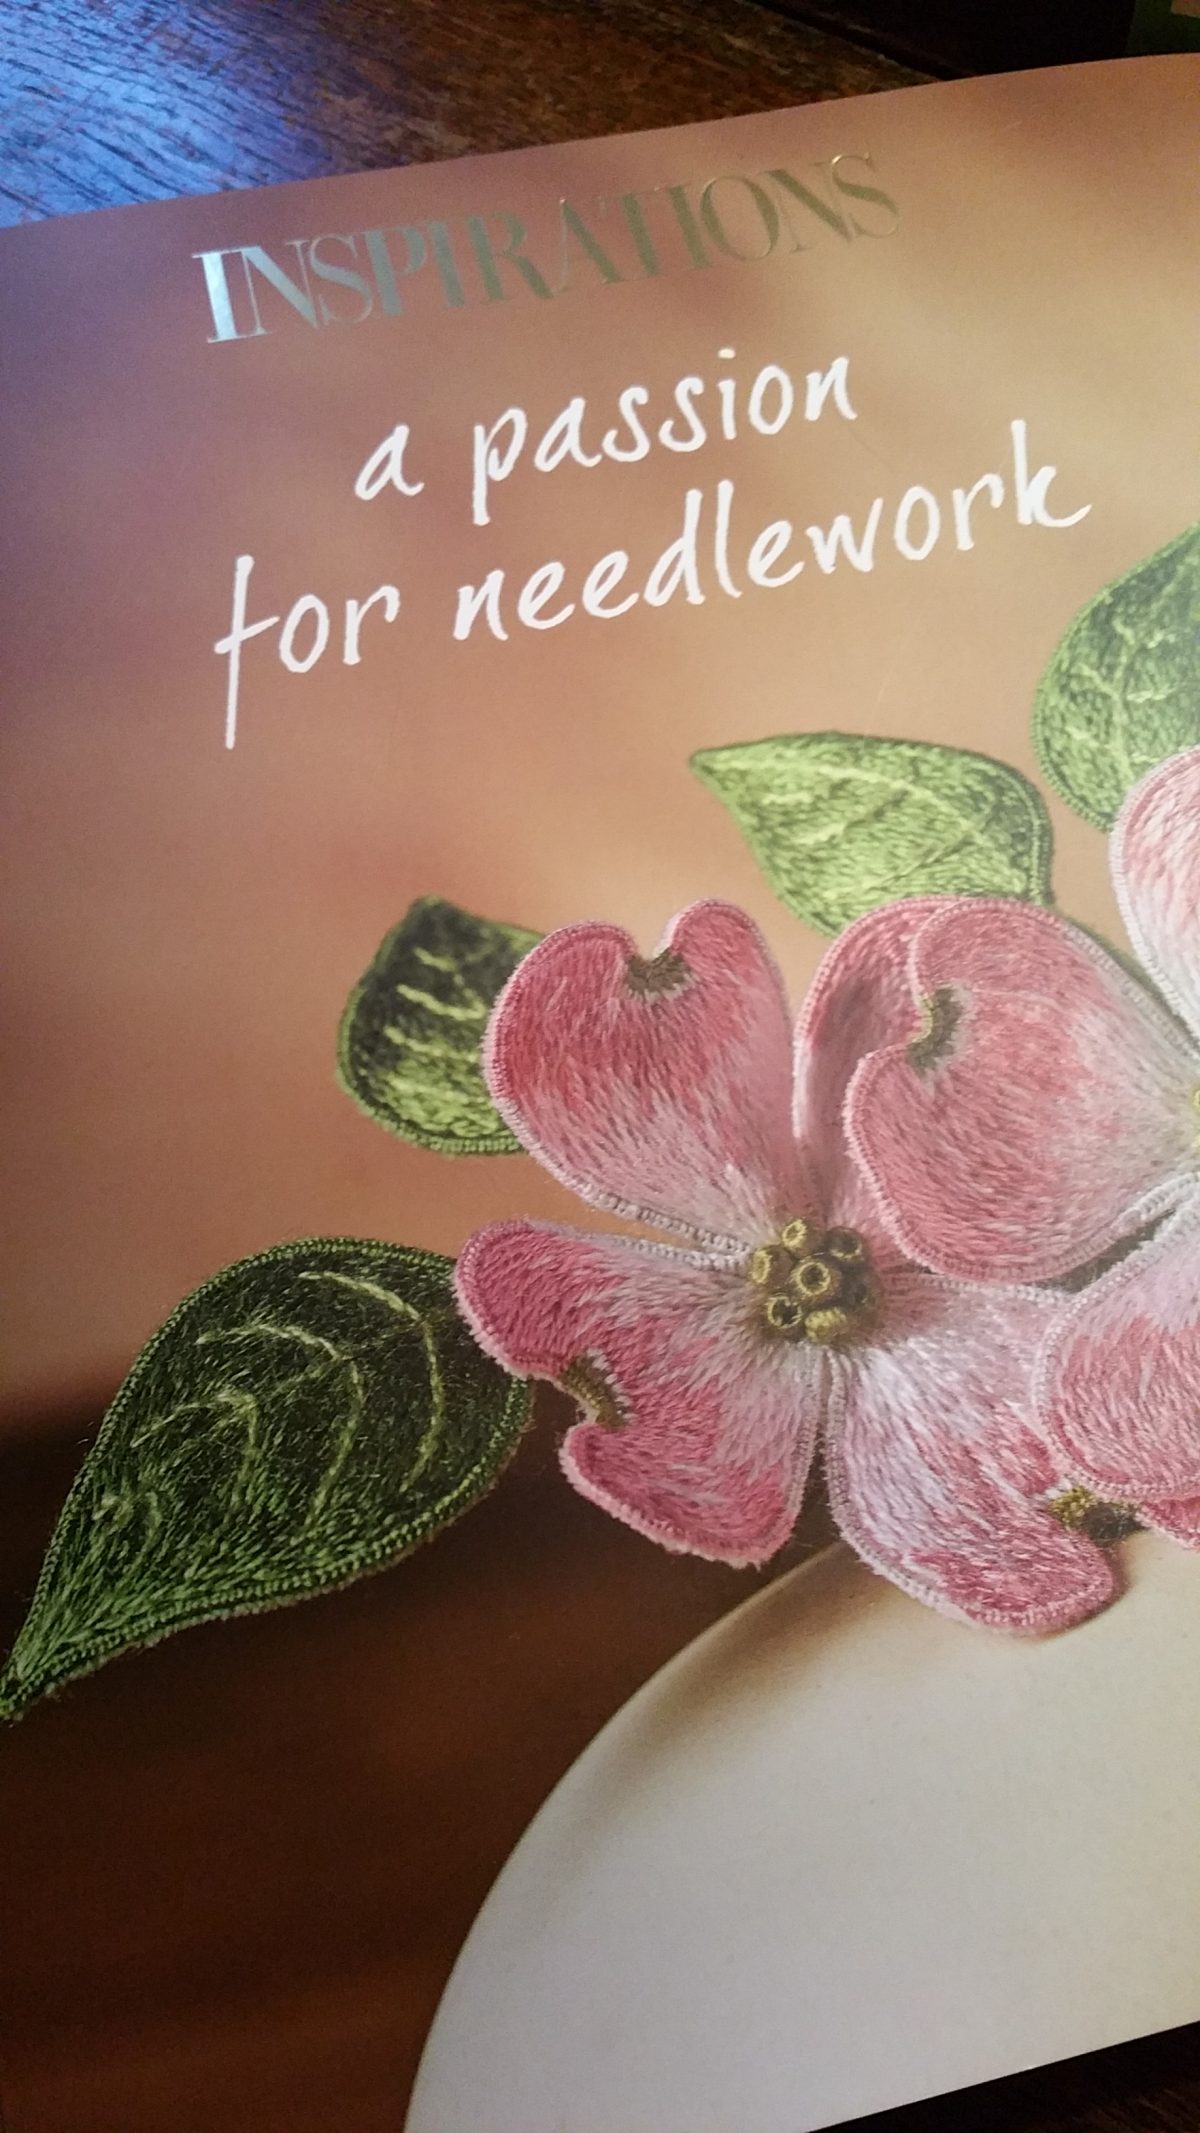 Book Review – Inspirations, A Passion for Needlework